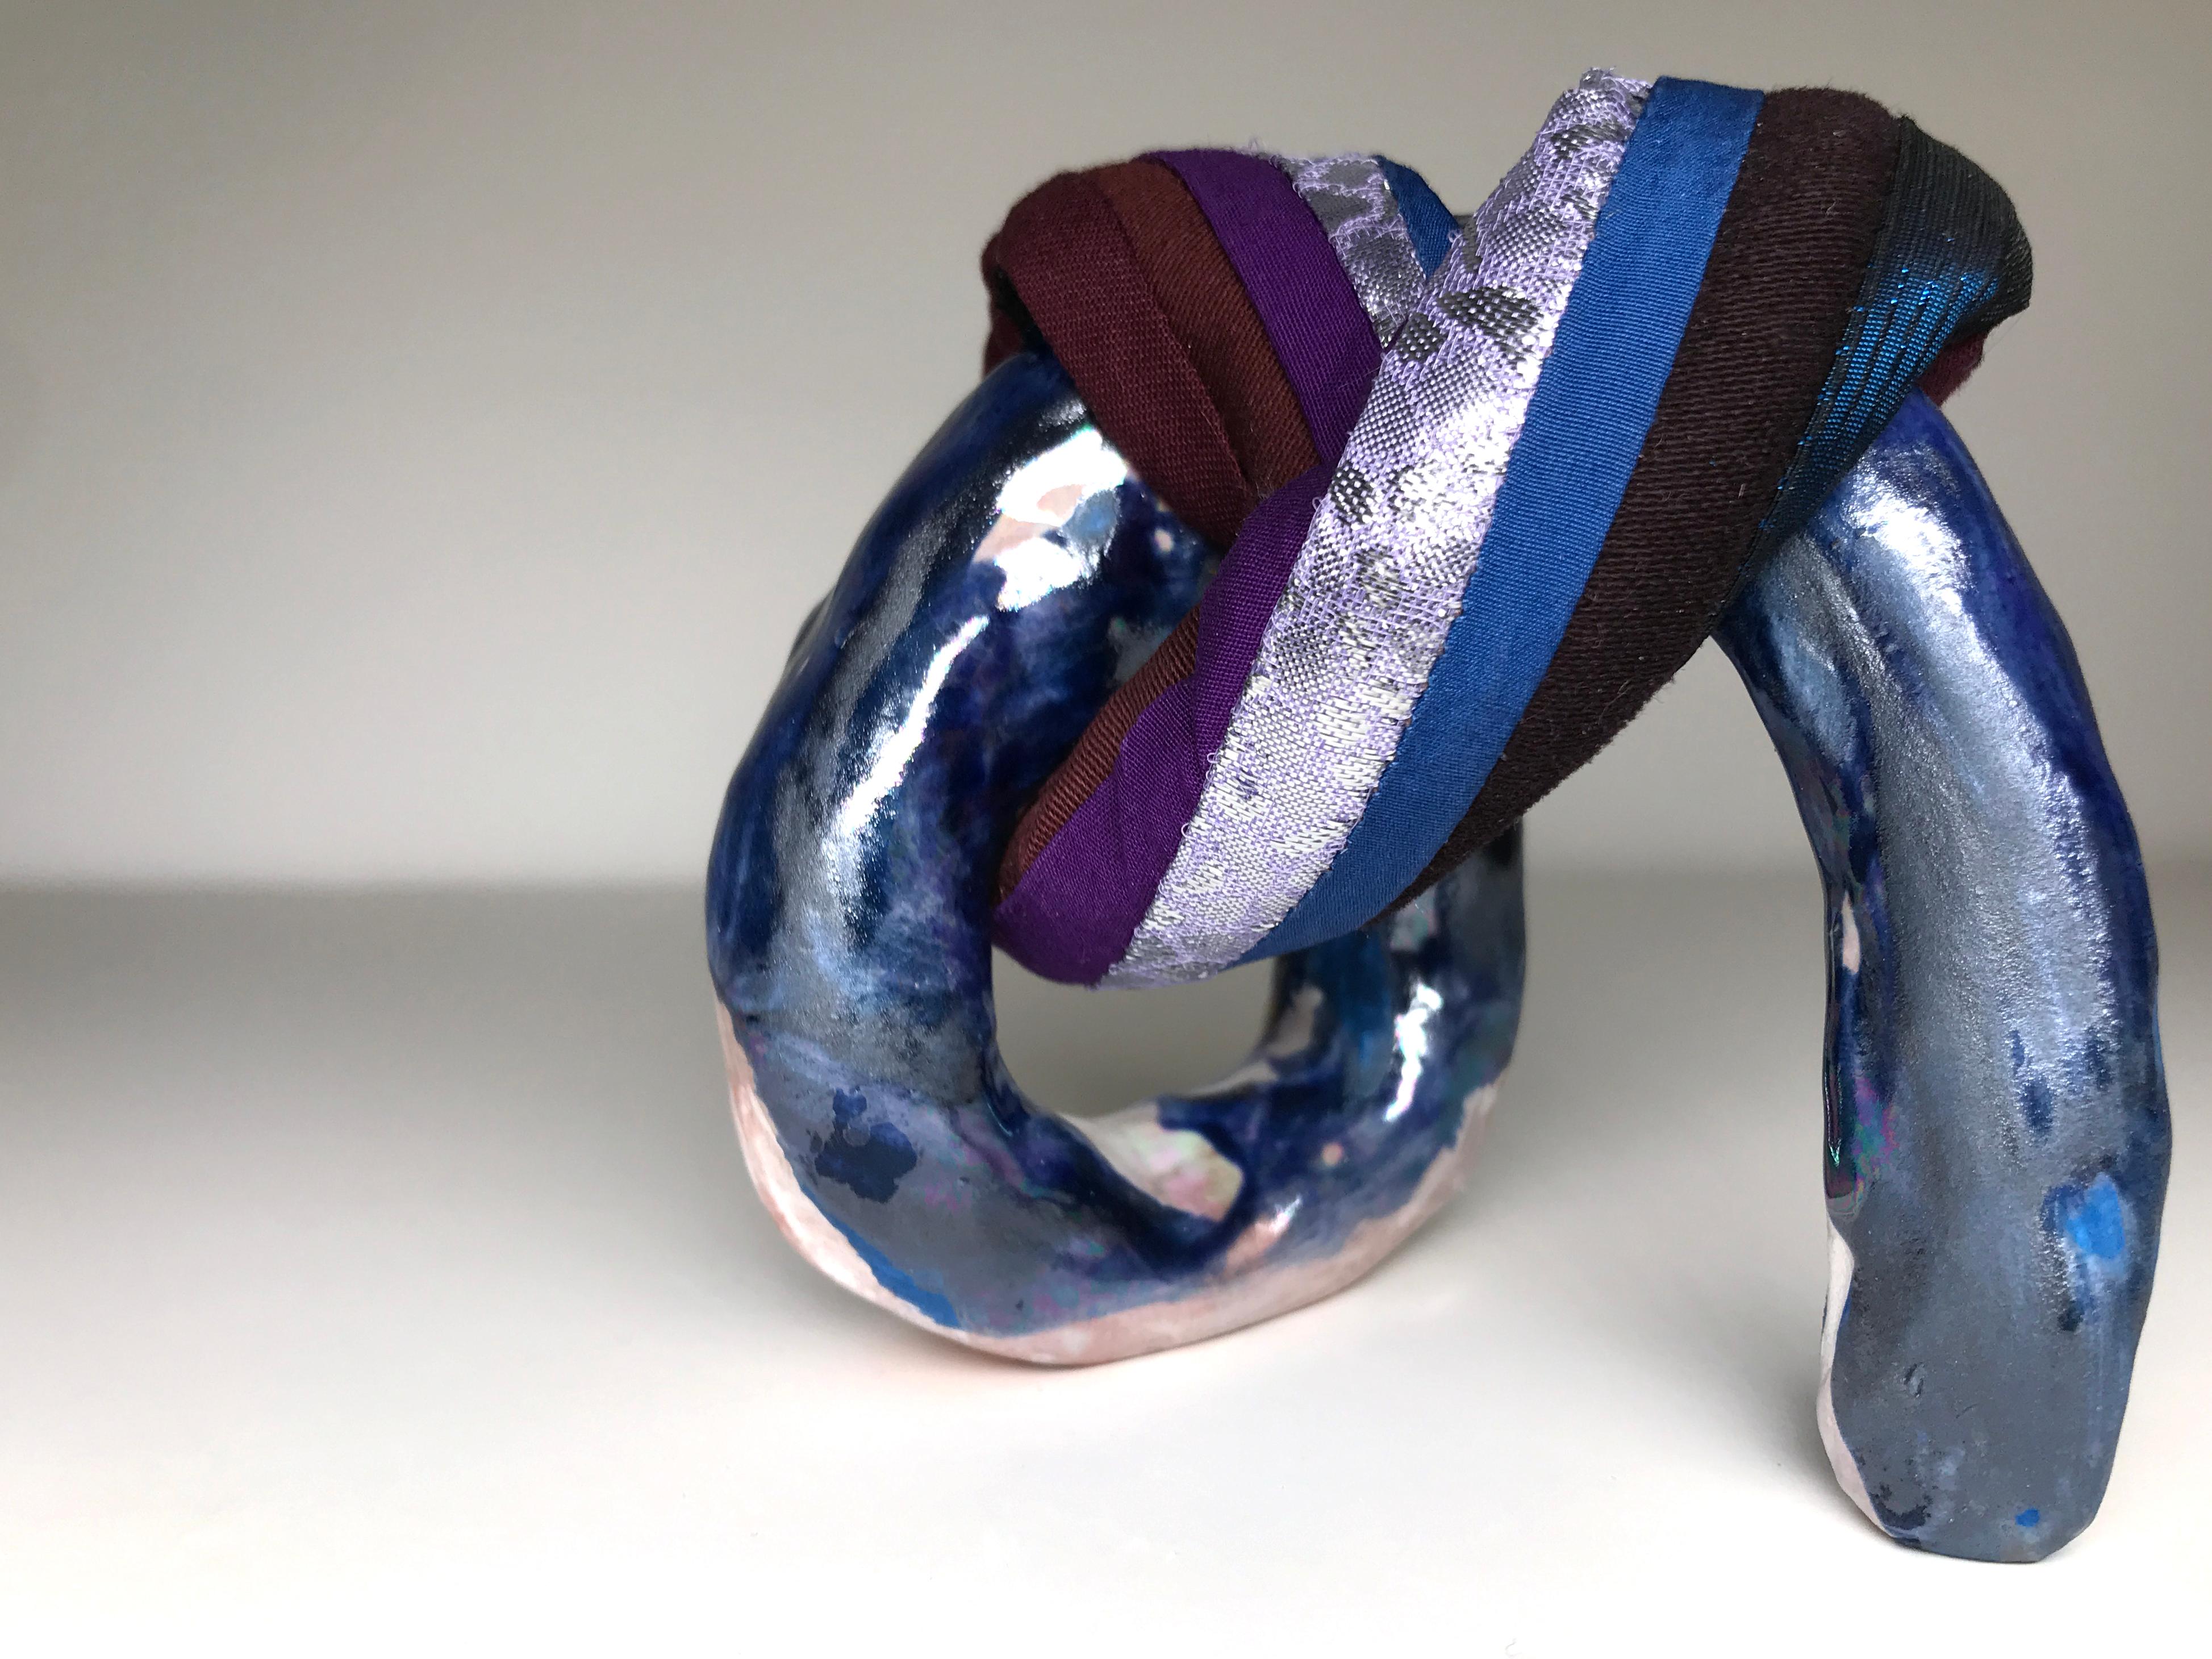 Ceramic and textile small sculpture: 'No. 18' - Contemporary Sculpture by Ak Jansen